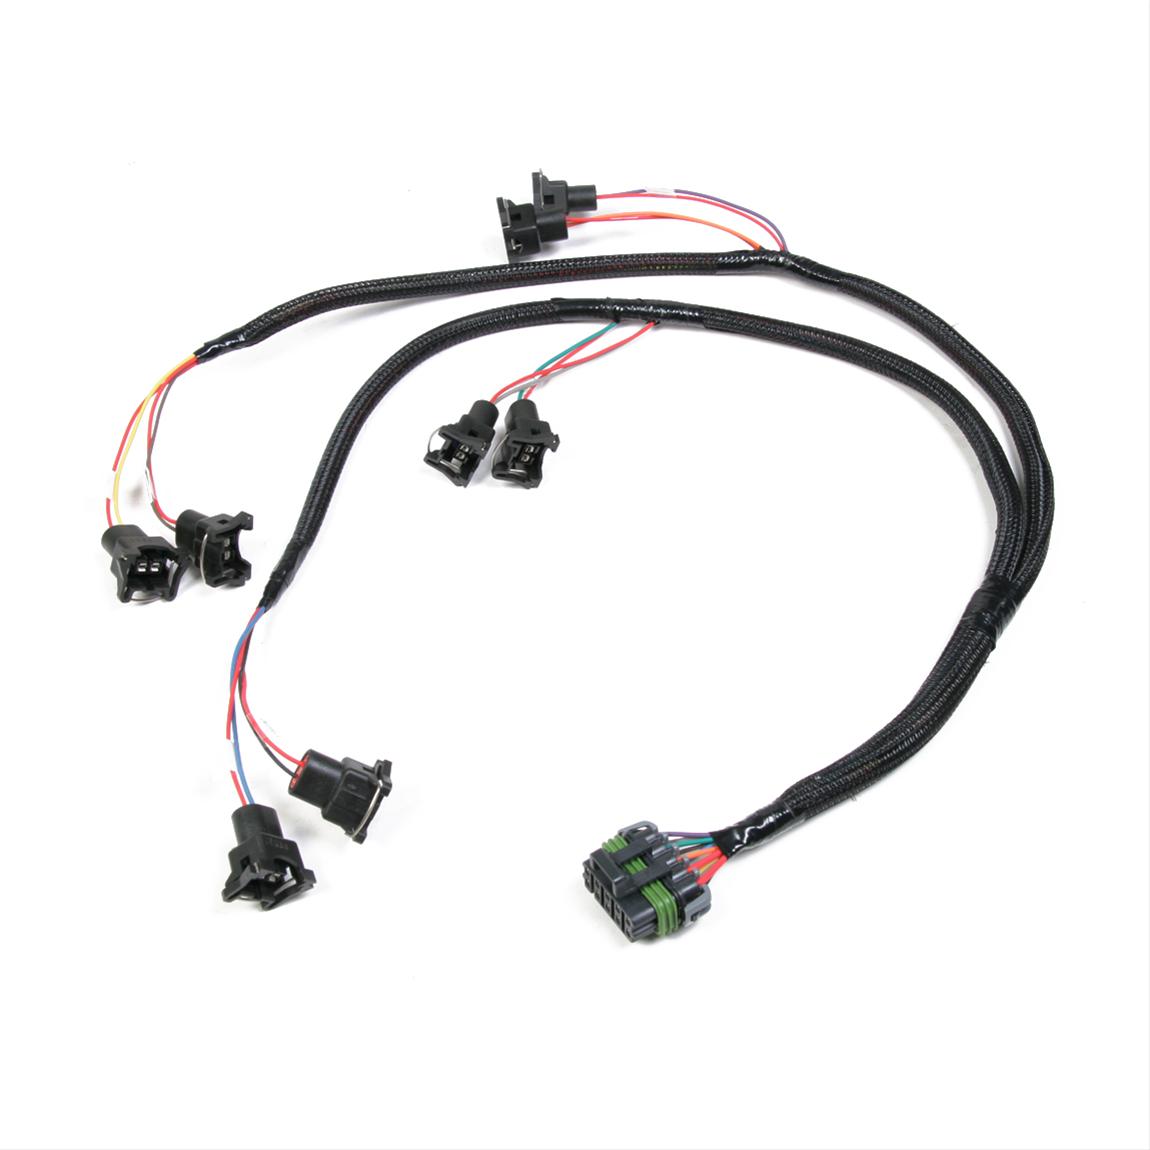 Holley EFI Systems Injector Wiring Harness